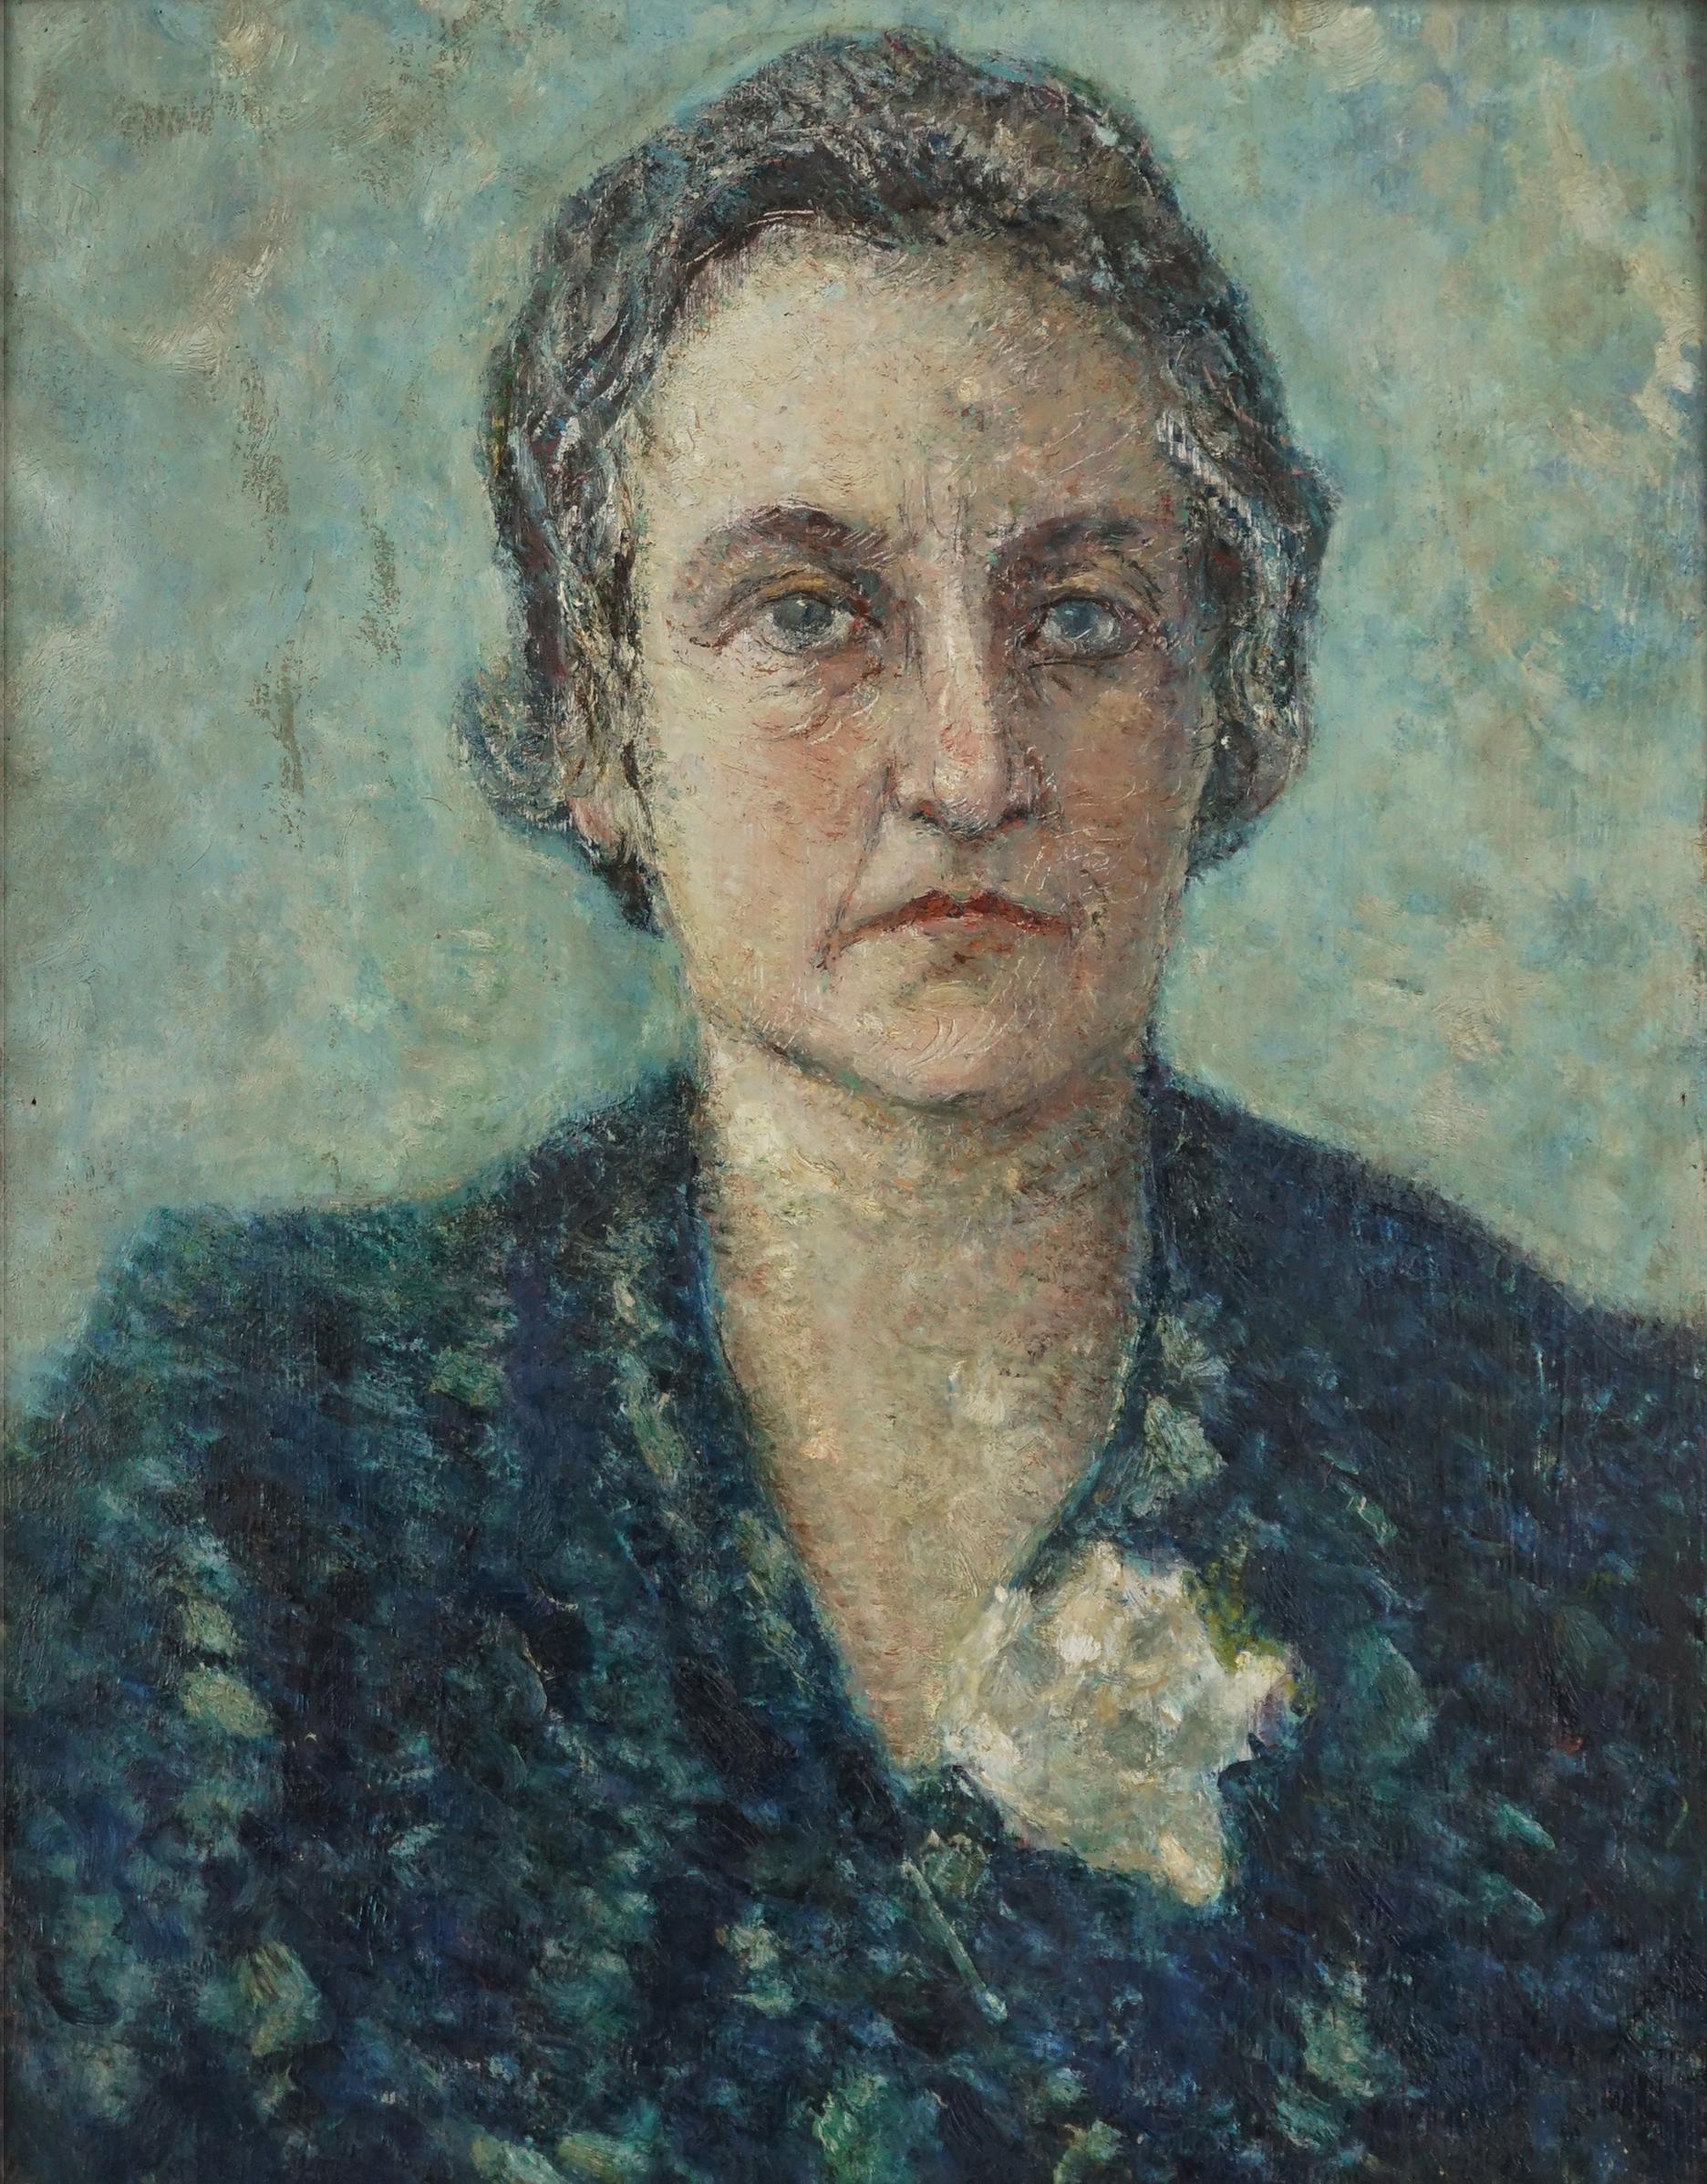 Beautiful portrait of older woman, possibly a Nonna (Grandmother) with Gardenia by Raul (or Raoul) Viviani (Italian, 1883 - 1965), circa 1950. Lovely texture of dabs of paint of Divisionist style adds interest and depth. Painting originally signed